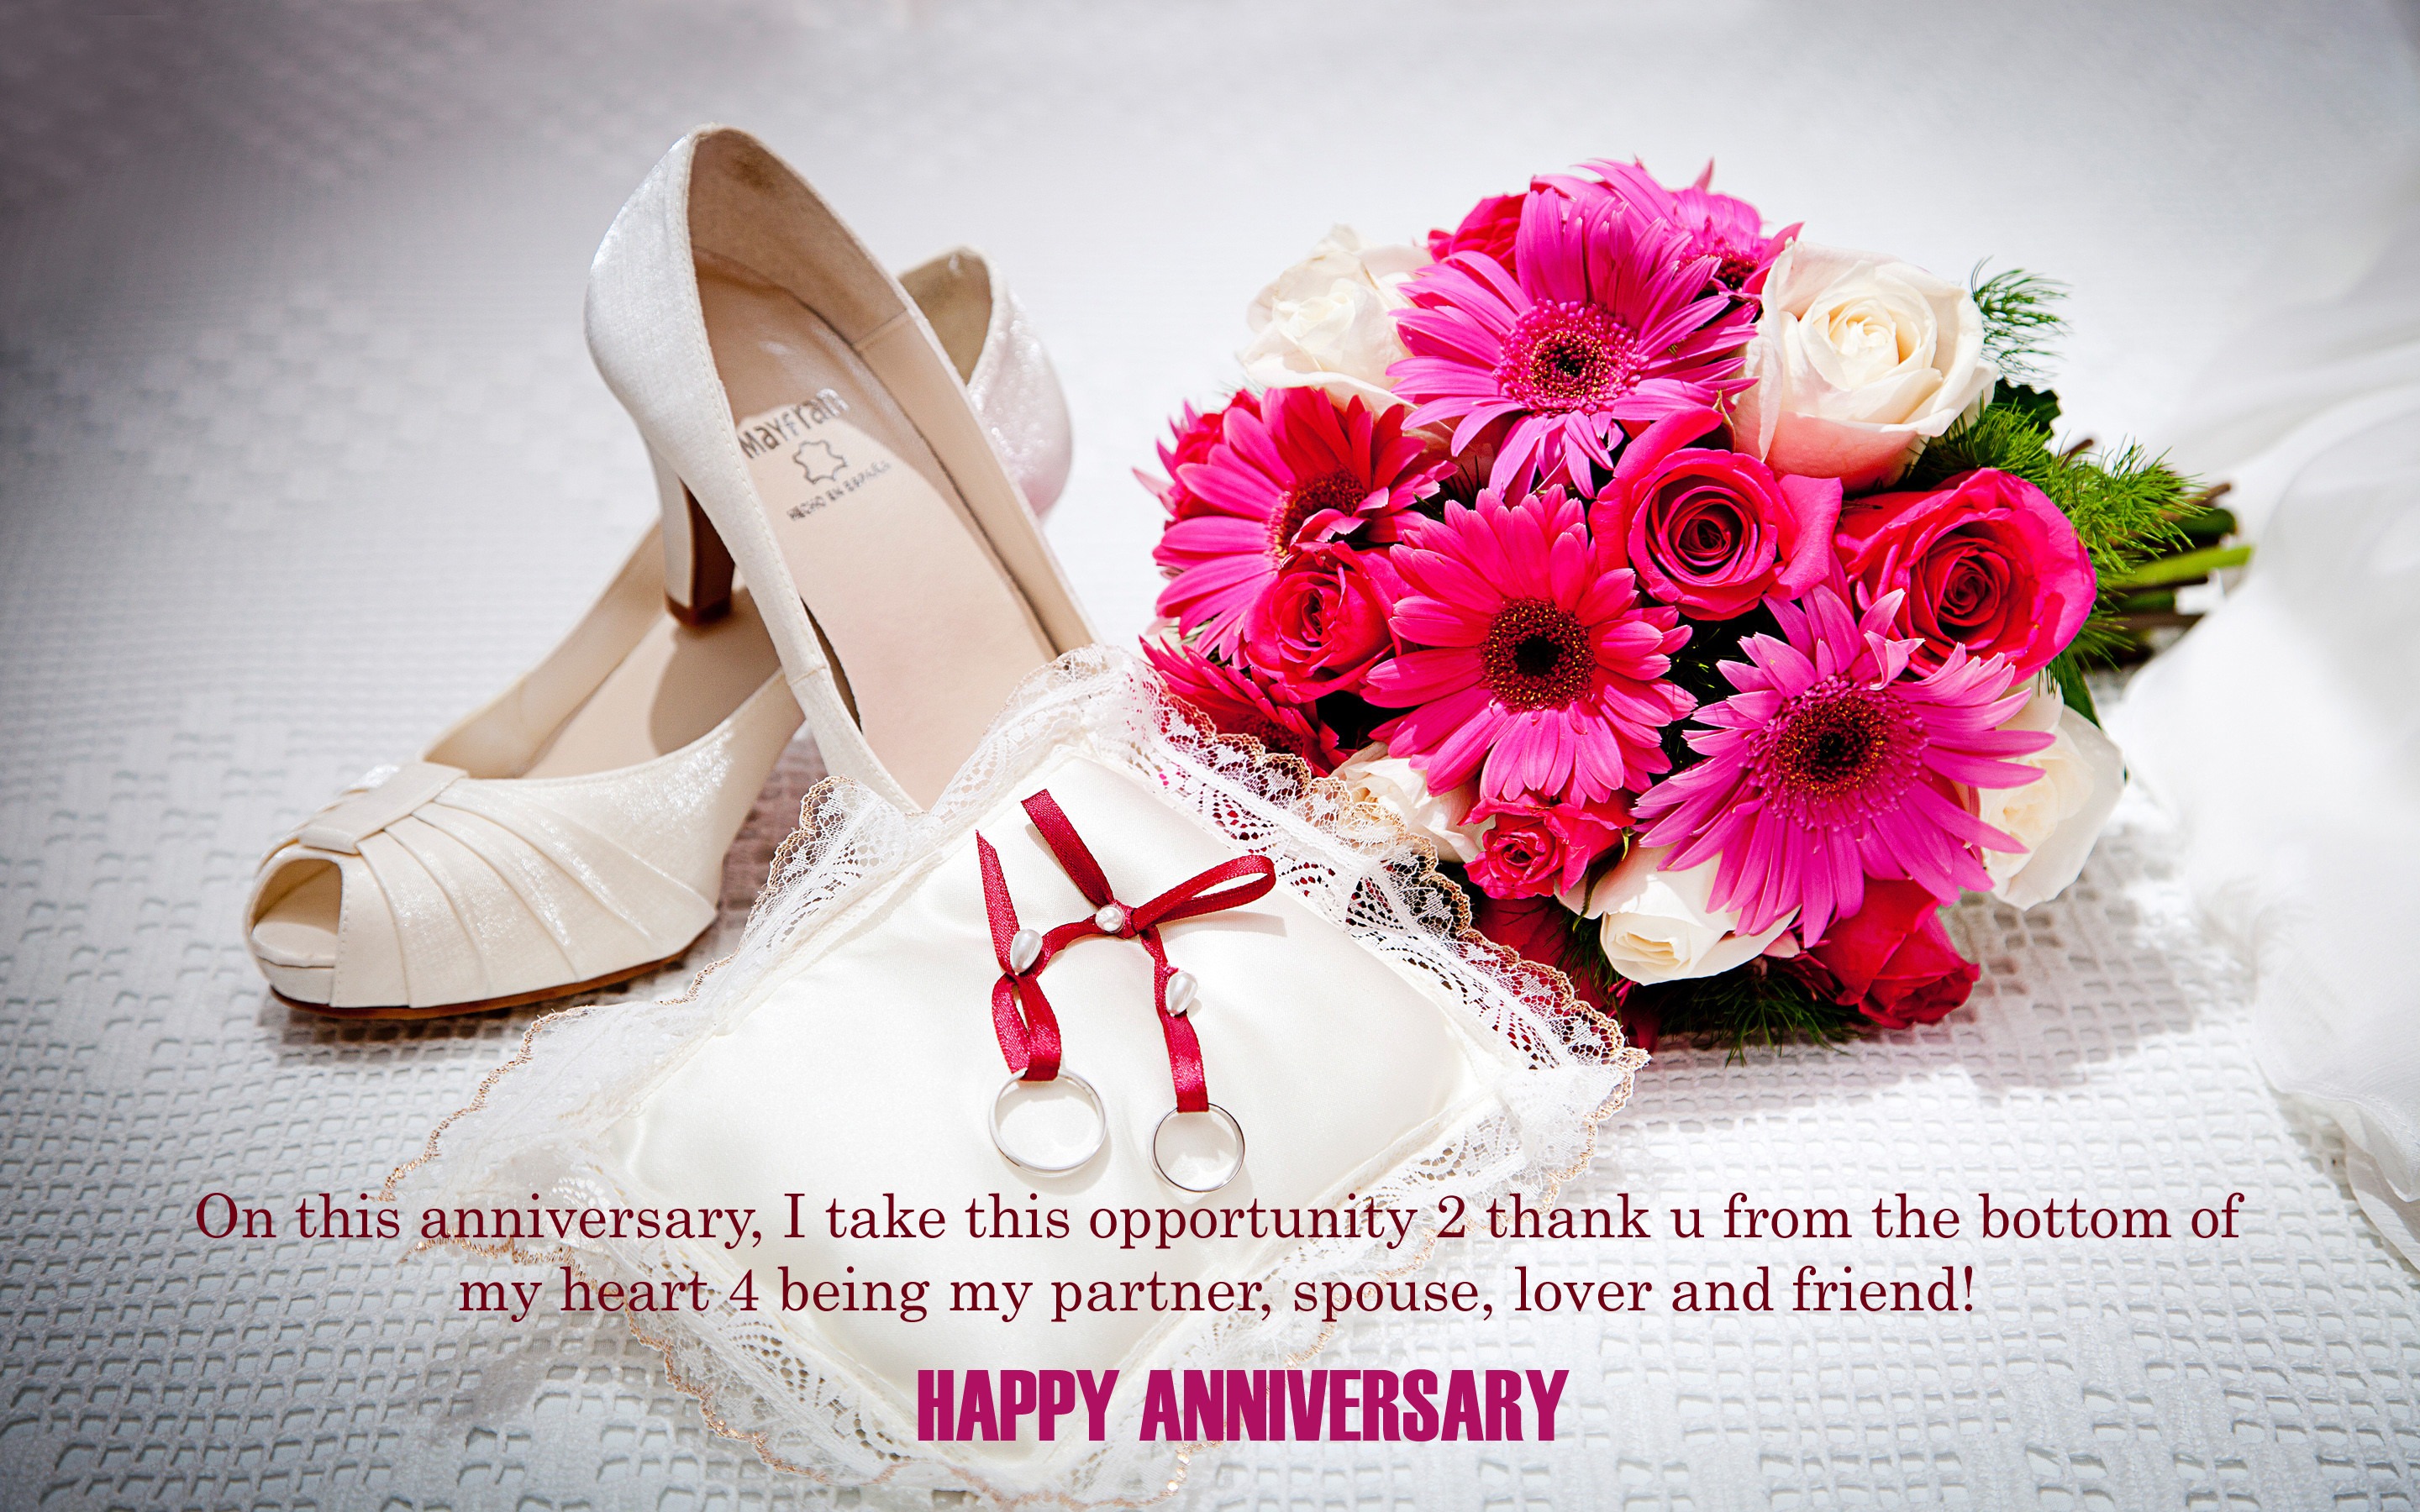 Happy Marriage Anniversary 1080p Hd Wallpapers - Beautiful Flowers And  Gifts - 2880x1800 Wallpaper 